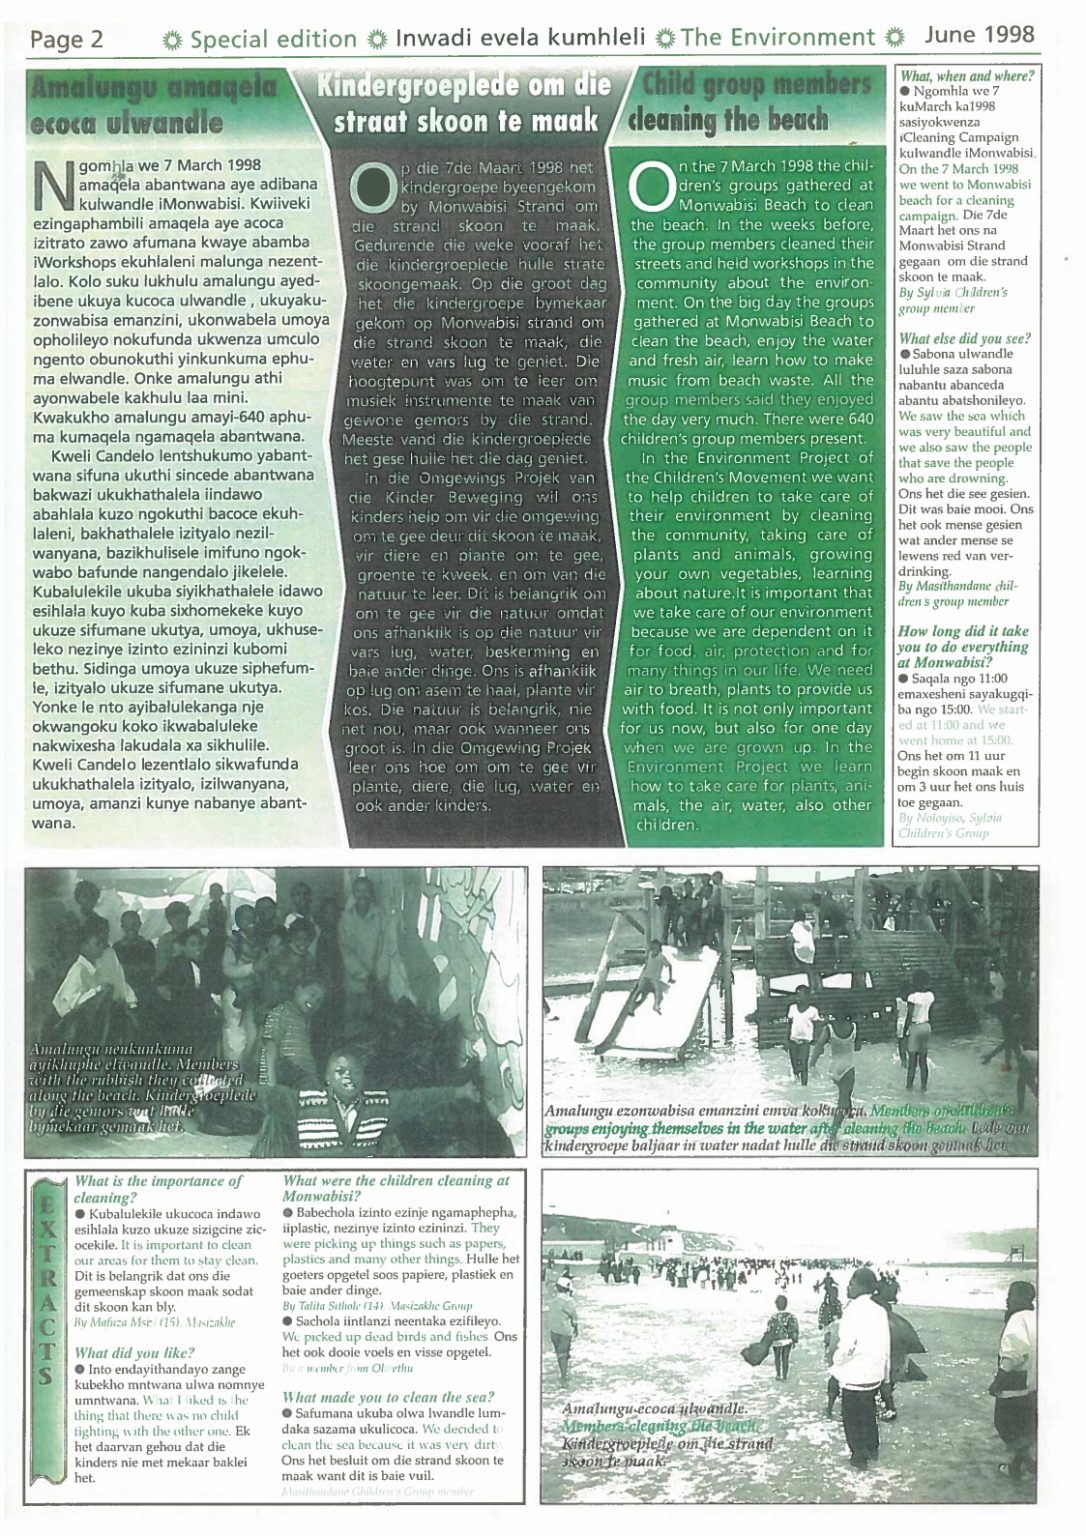 Page 2 of Voice of the Children, June 1998.